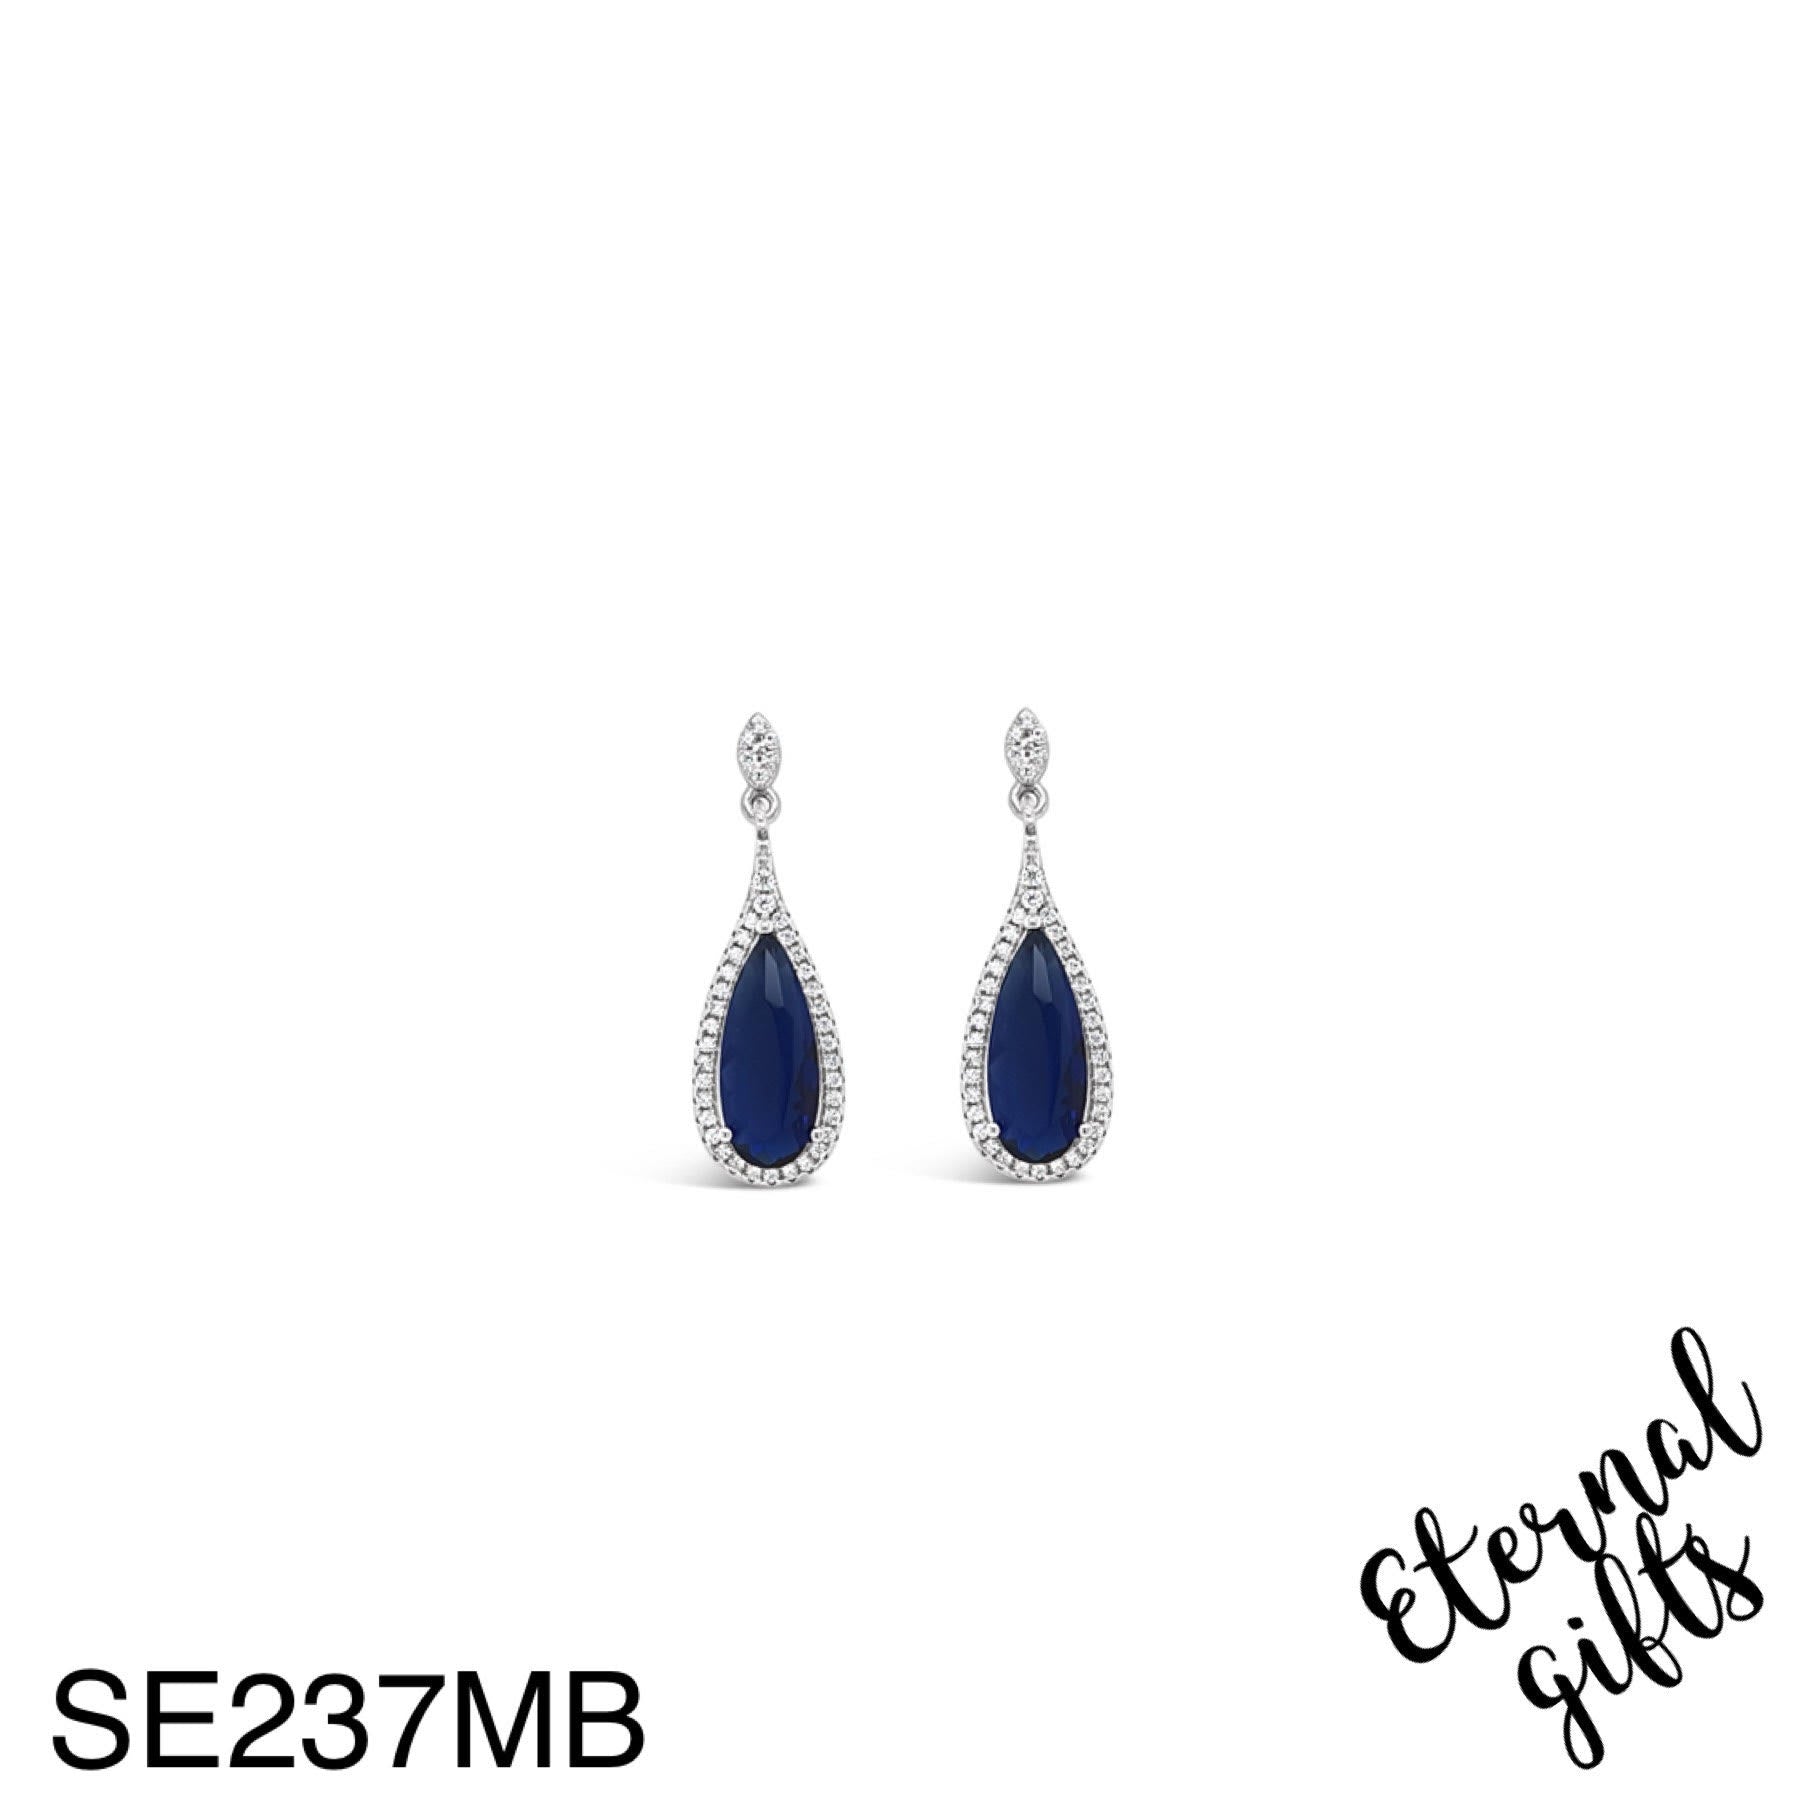 SE237MB Silver Drop earrings from The Sapphire Collection - Silver by Absolute